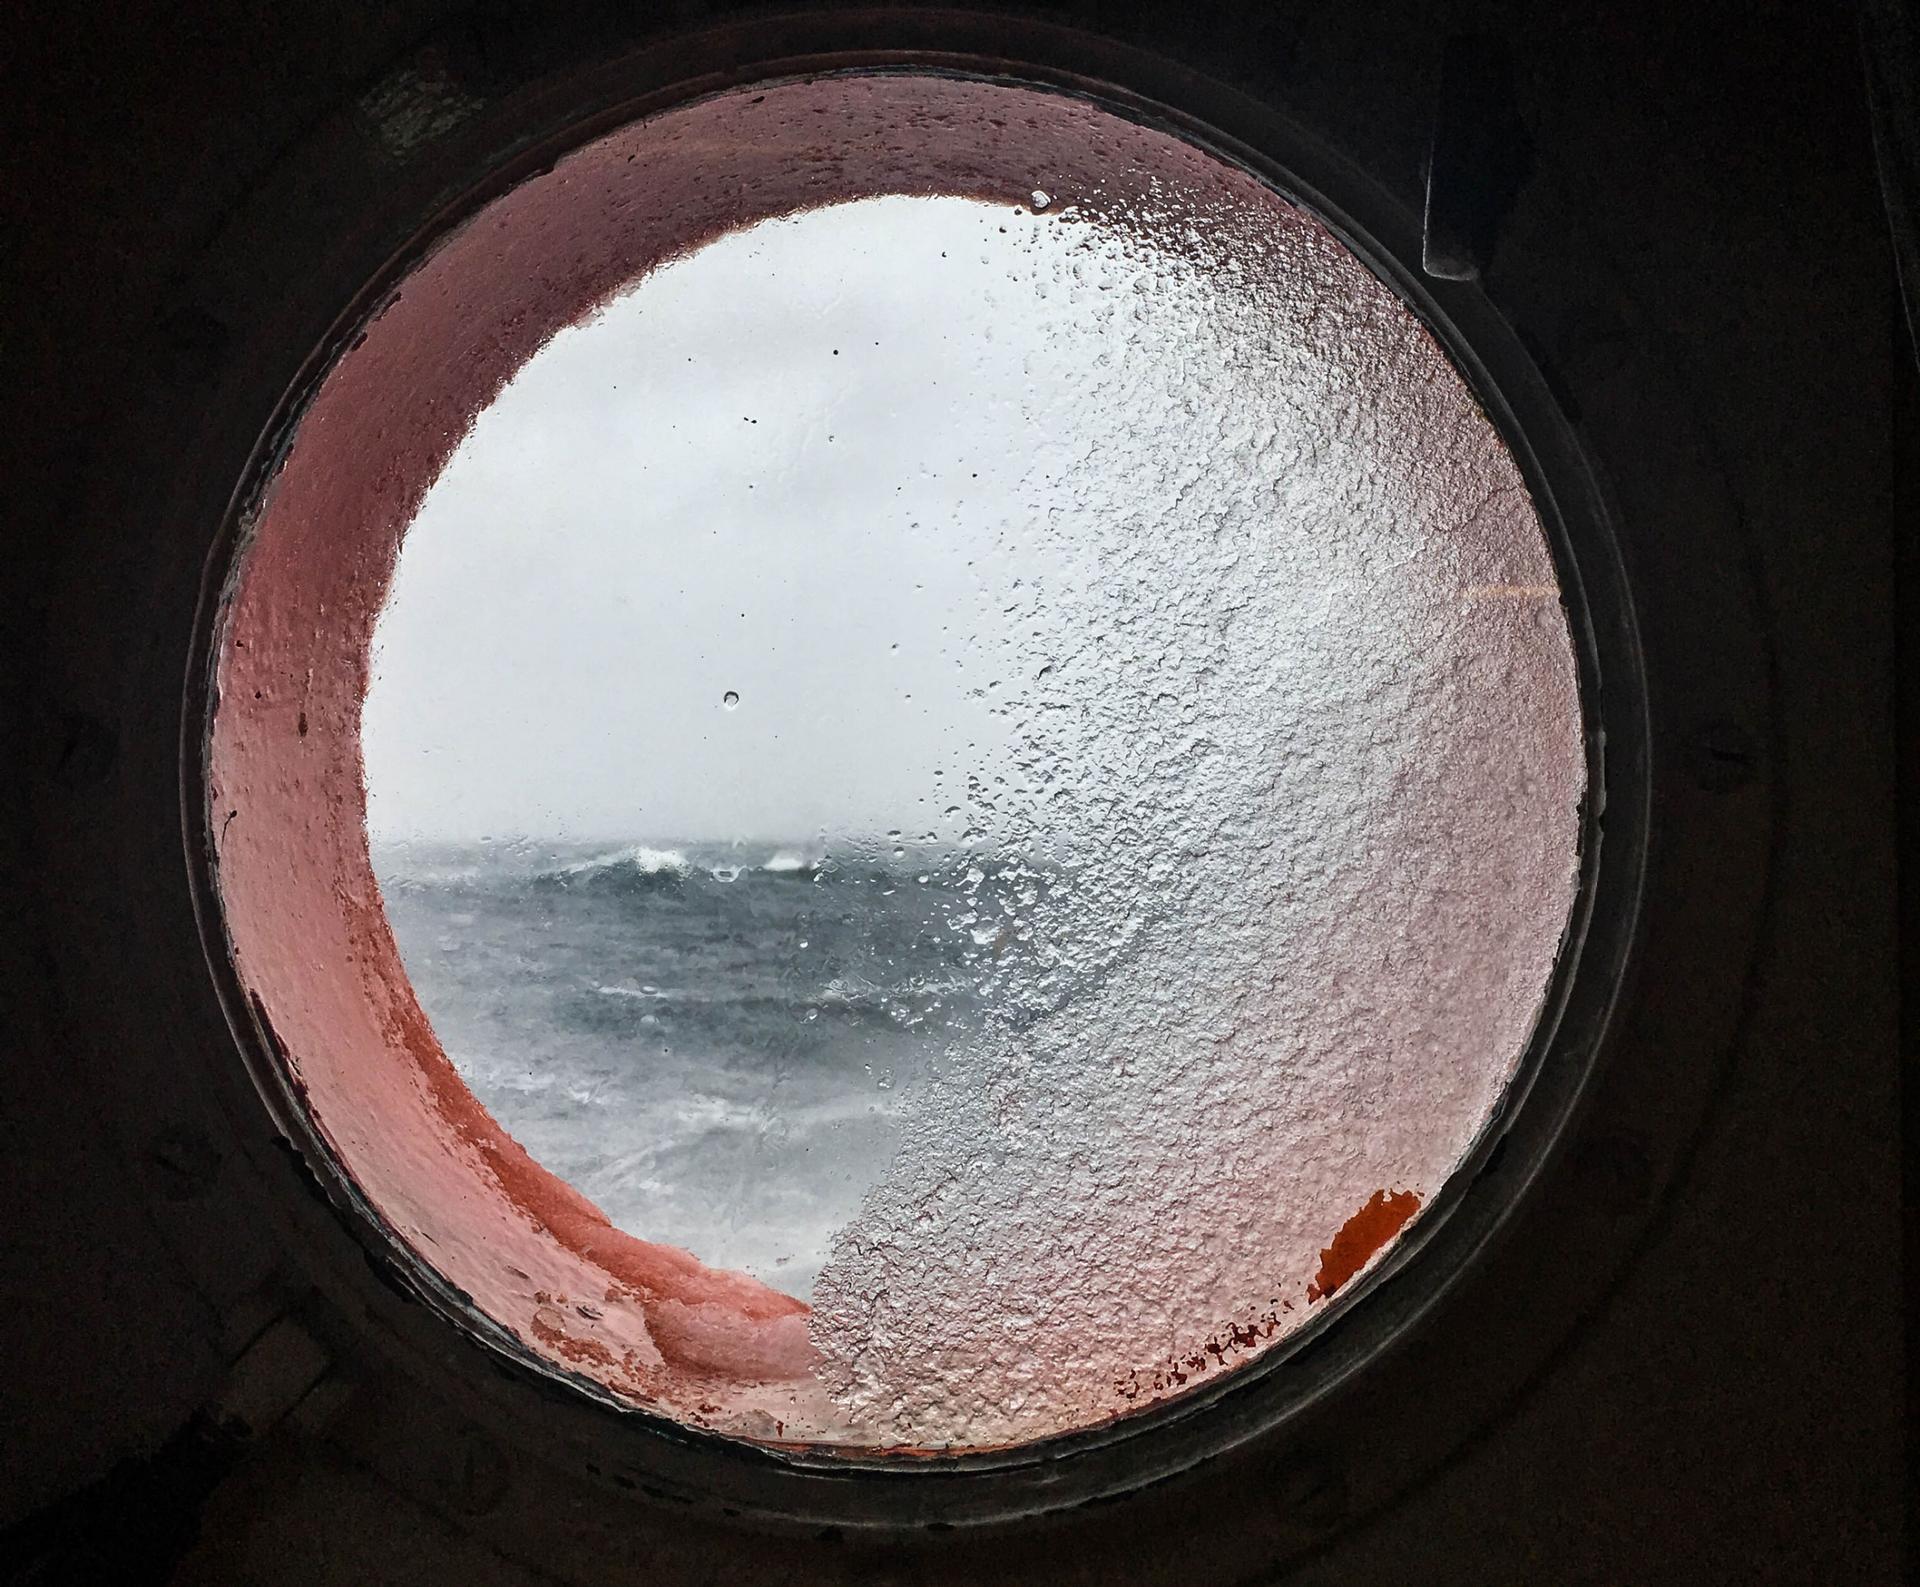 A round window is shown with very choppy waves off in the distance.